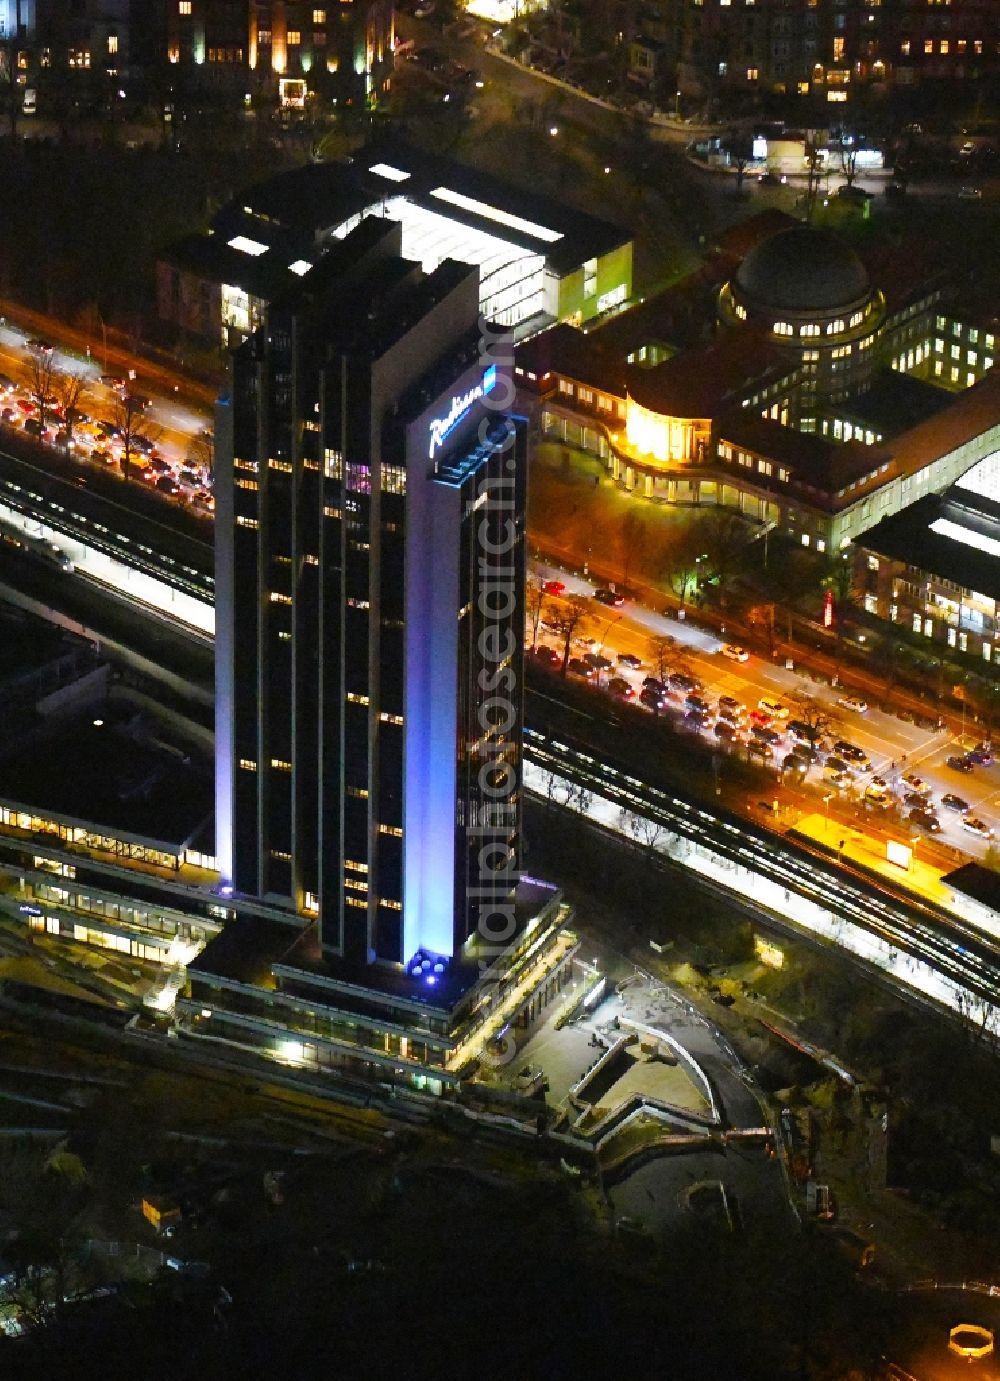 Hamburg at night from above - Night lighting renovation site of the Congress Center ( CCH ) on High-rise building of the hotel complex Radisson Blu on Marseiller Strasse in Hamburg, Germany